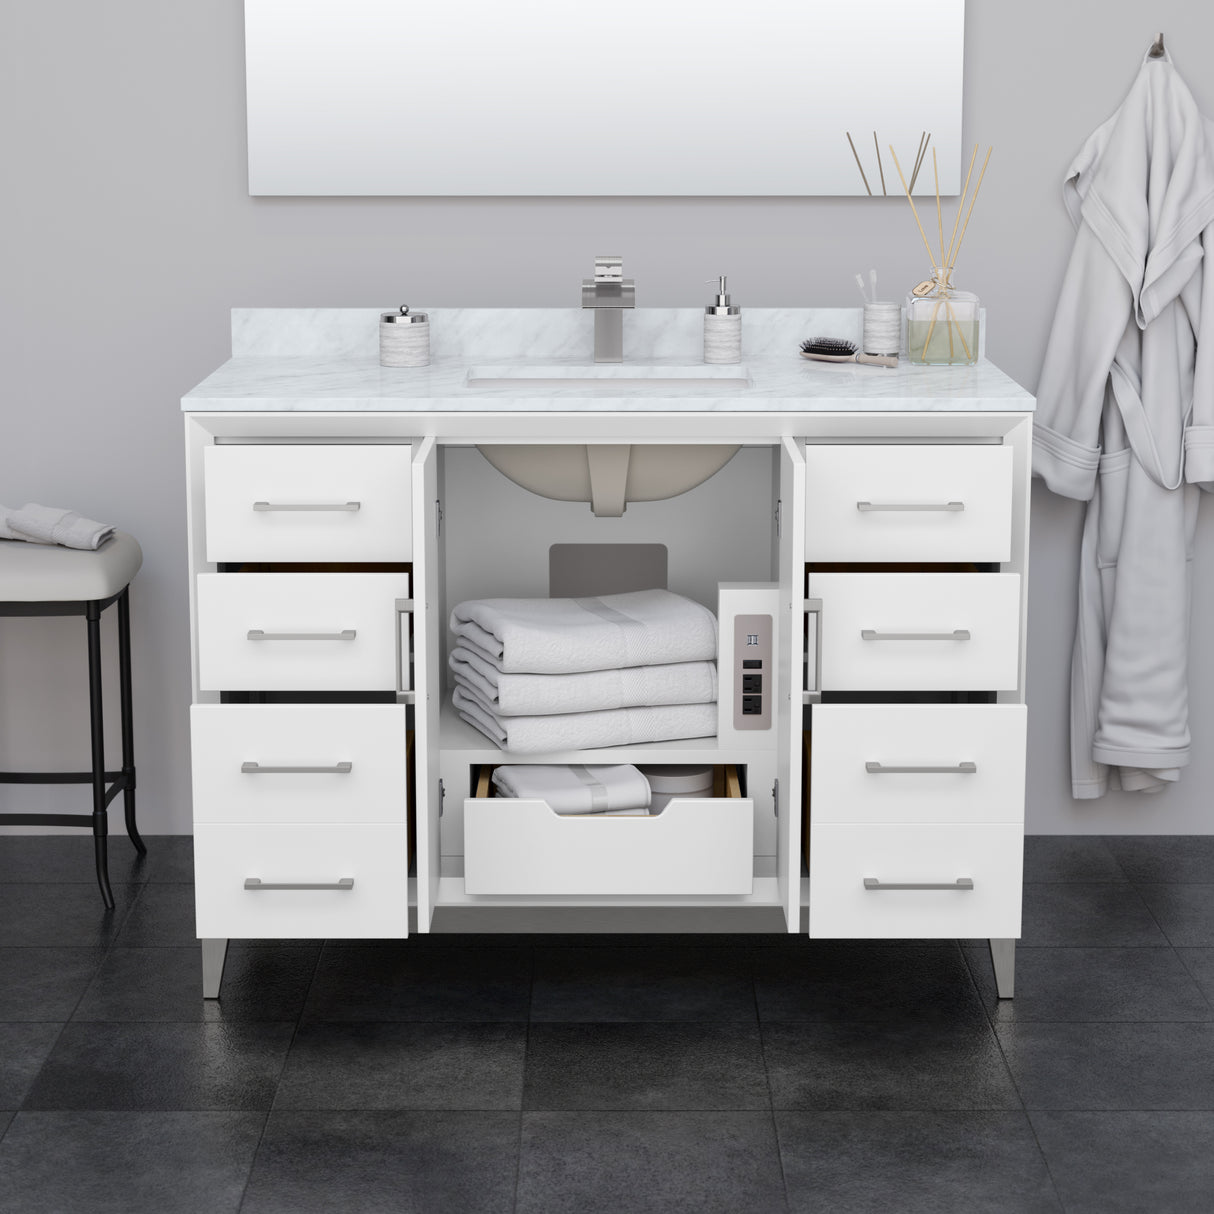 Amici 48 Inch Single Bathroom Vanity in White Carrara Cultured Marble Countertop Undermount Square Sink Brushed Nickel Trim